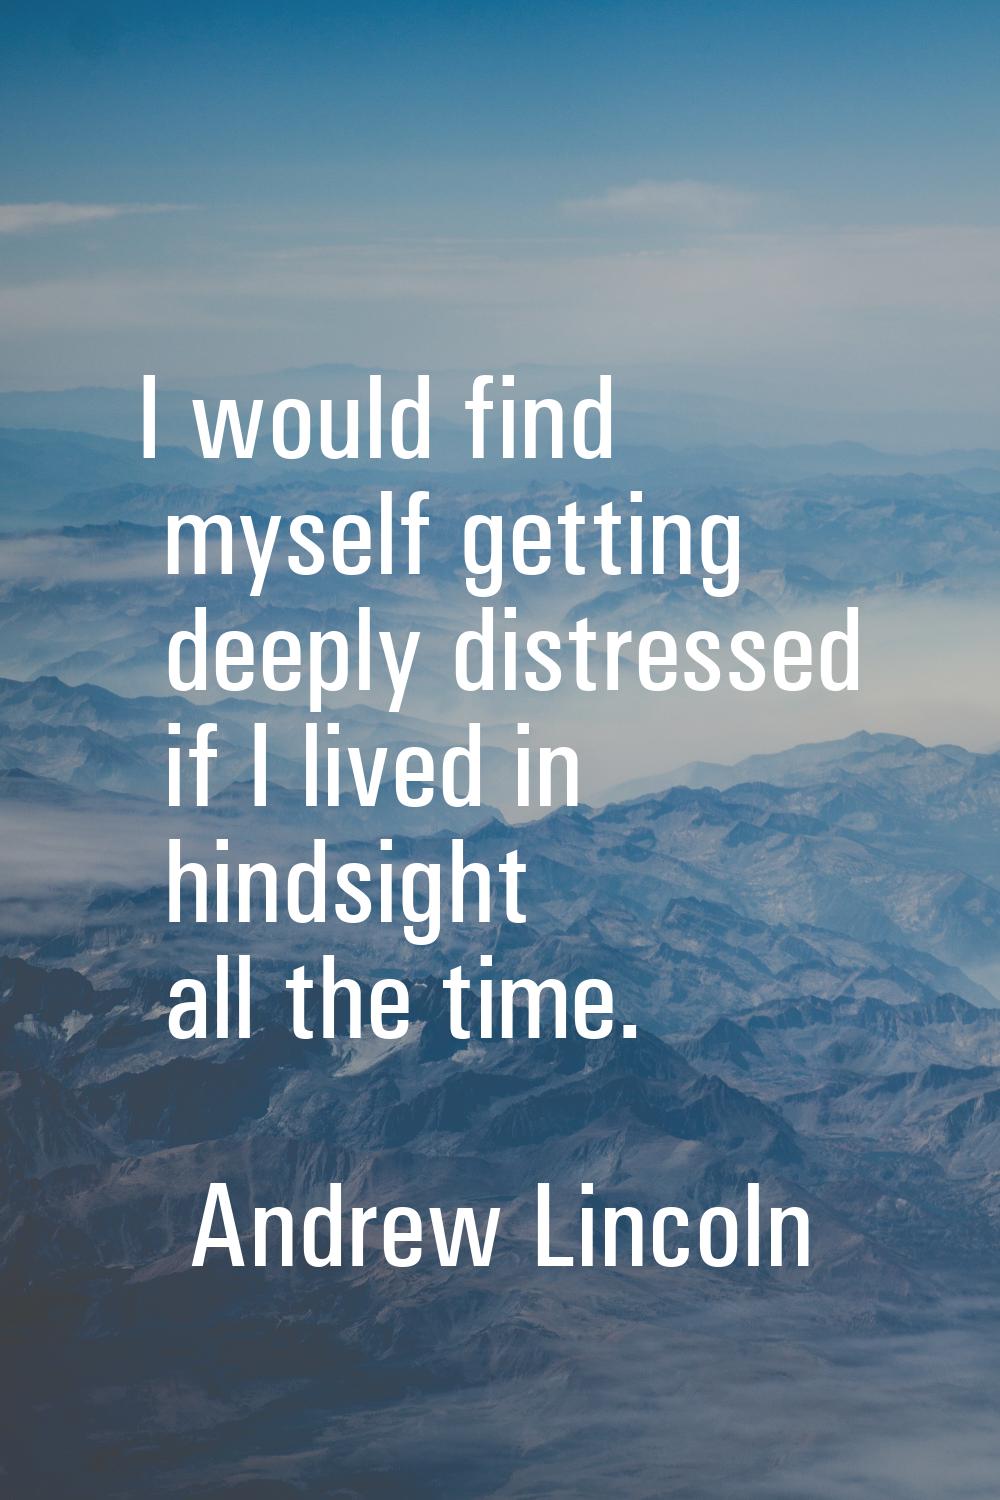 I would find myself getting deeply distressed if I lived in hindsight all the time.